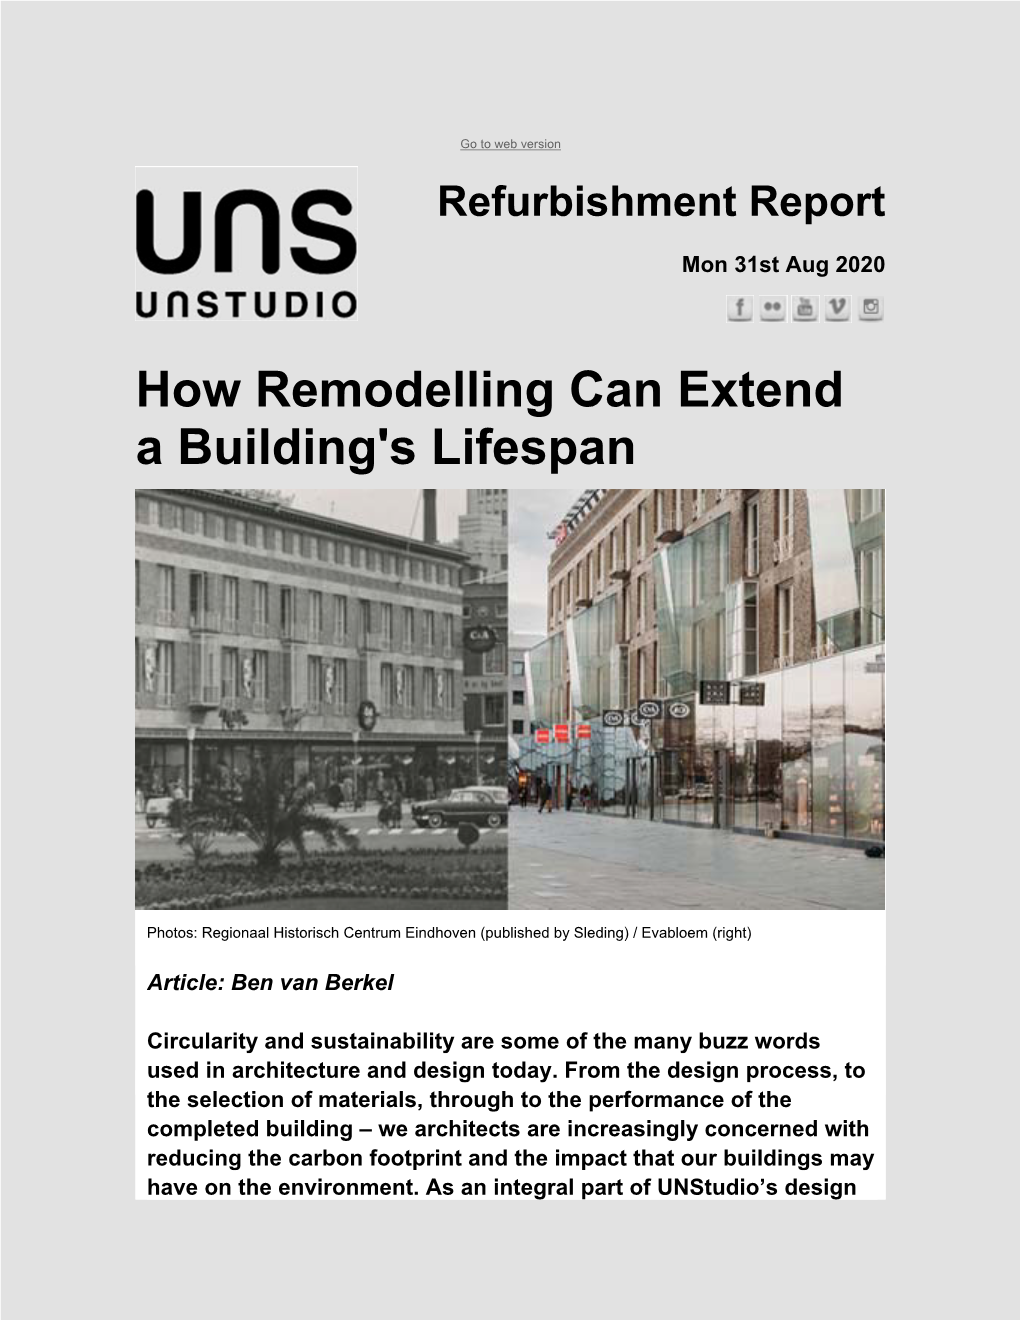 How Remodelling Can Extend a Building's Lifespan